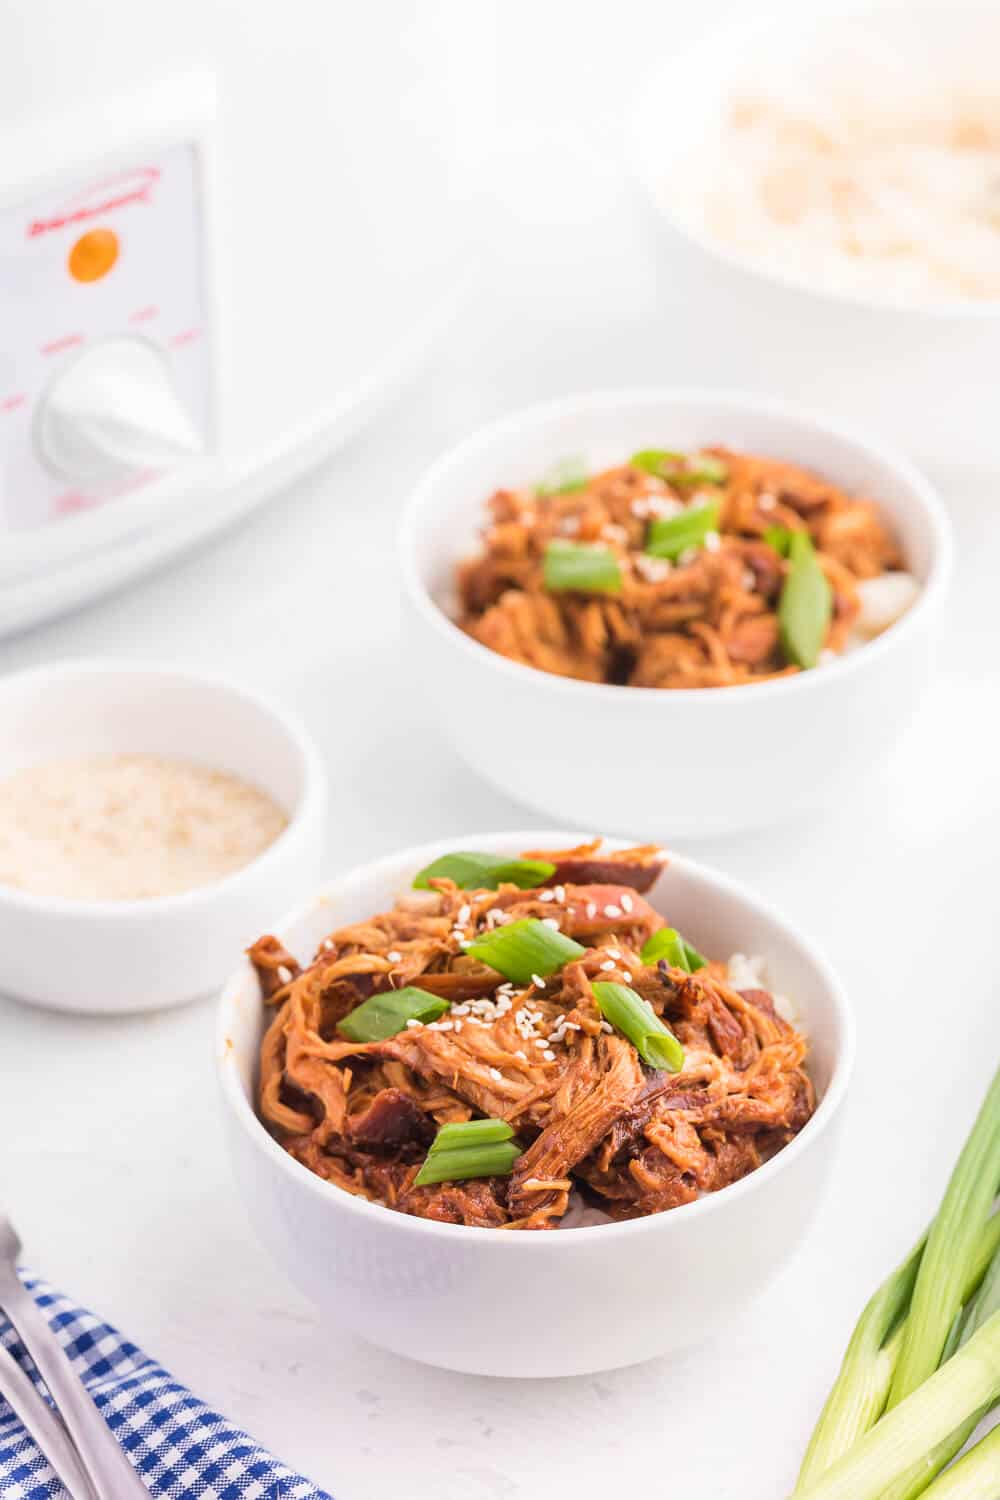 Slow Cooker Asian Chicken - This easy crockpot chicken is the perfect dinner for busy days. Tender chicken breasts are slow cooked in a flavorful sauce made with honey, garlic and spices. Serve over rice for a delicious family meal.